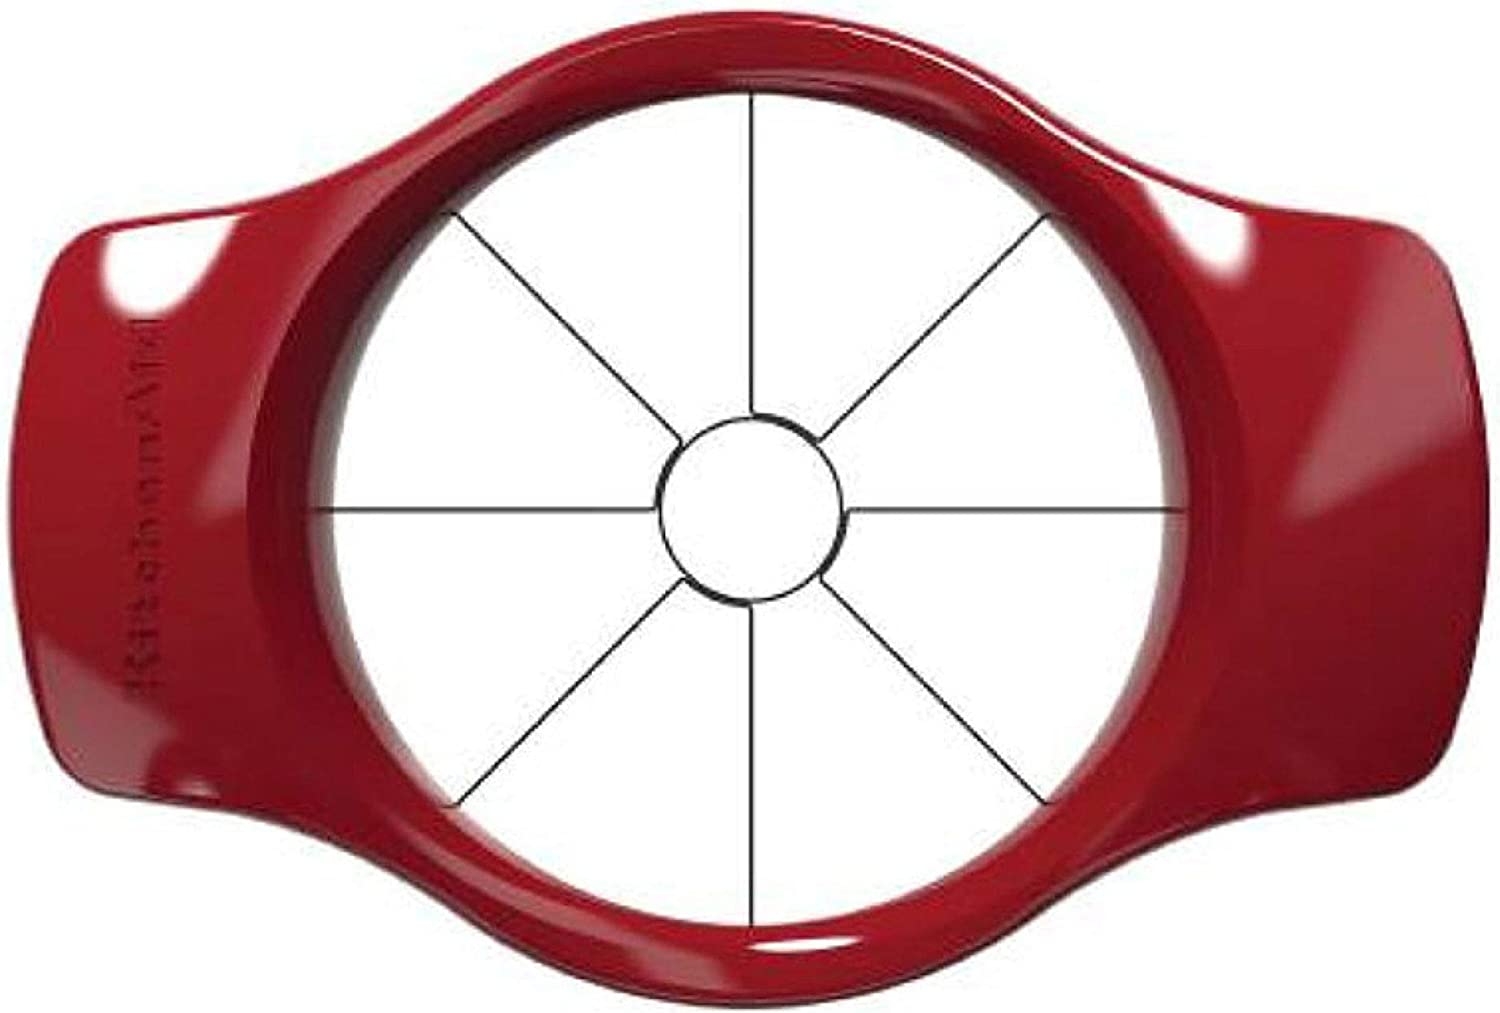 KitchenAid Classic Fruit Slicer, One Size, Red Import To Shop ×Product customization General Description Gallery Reviews